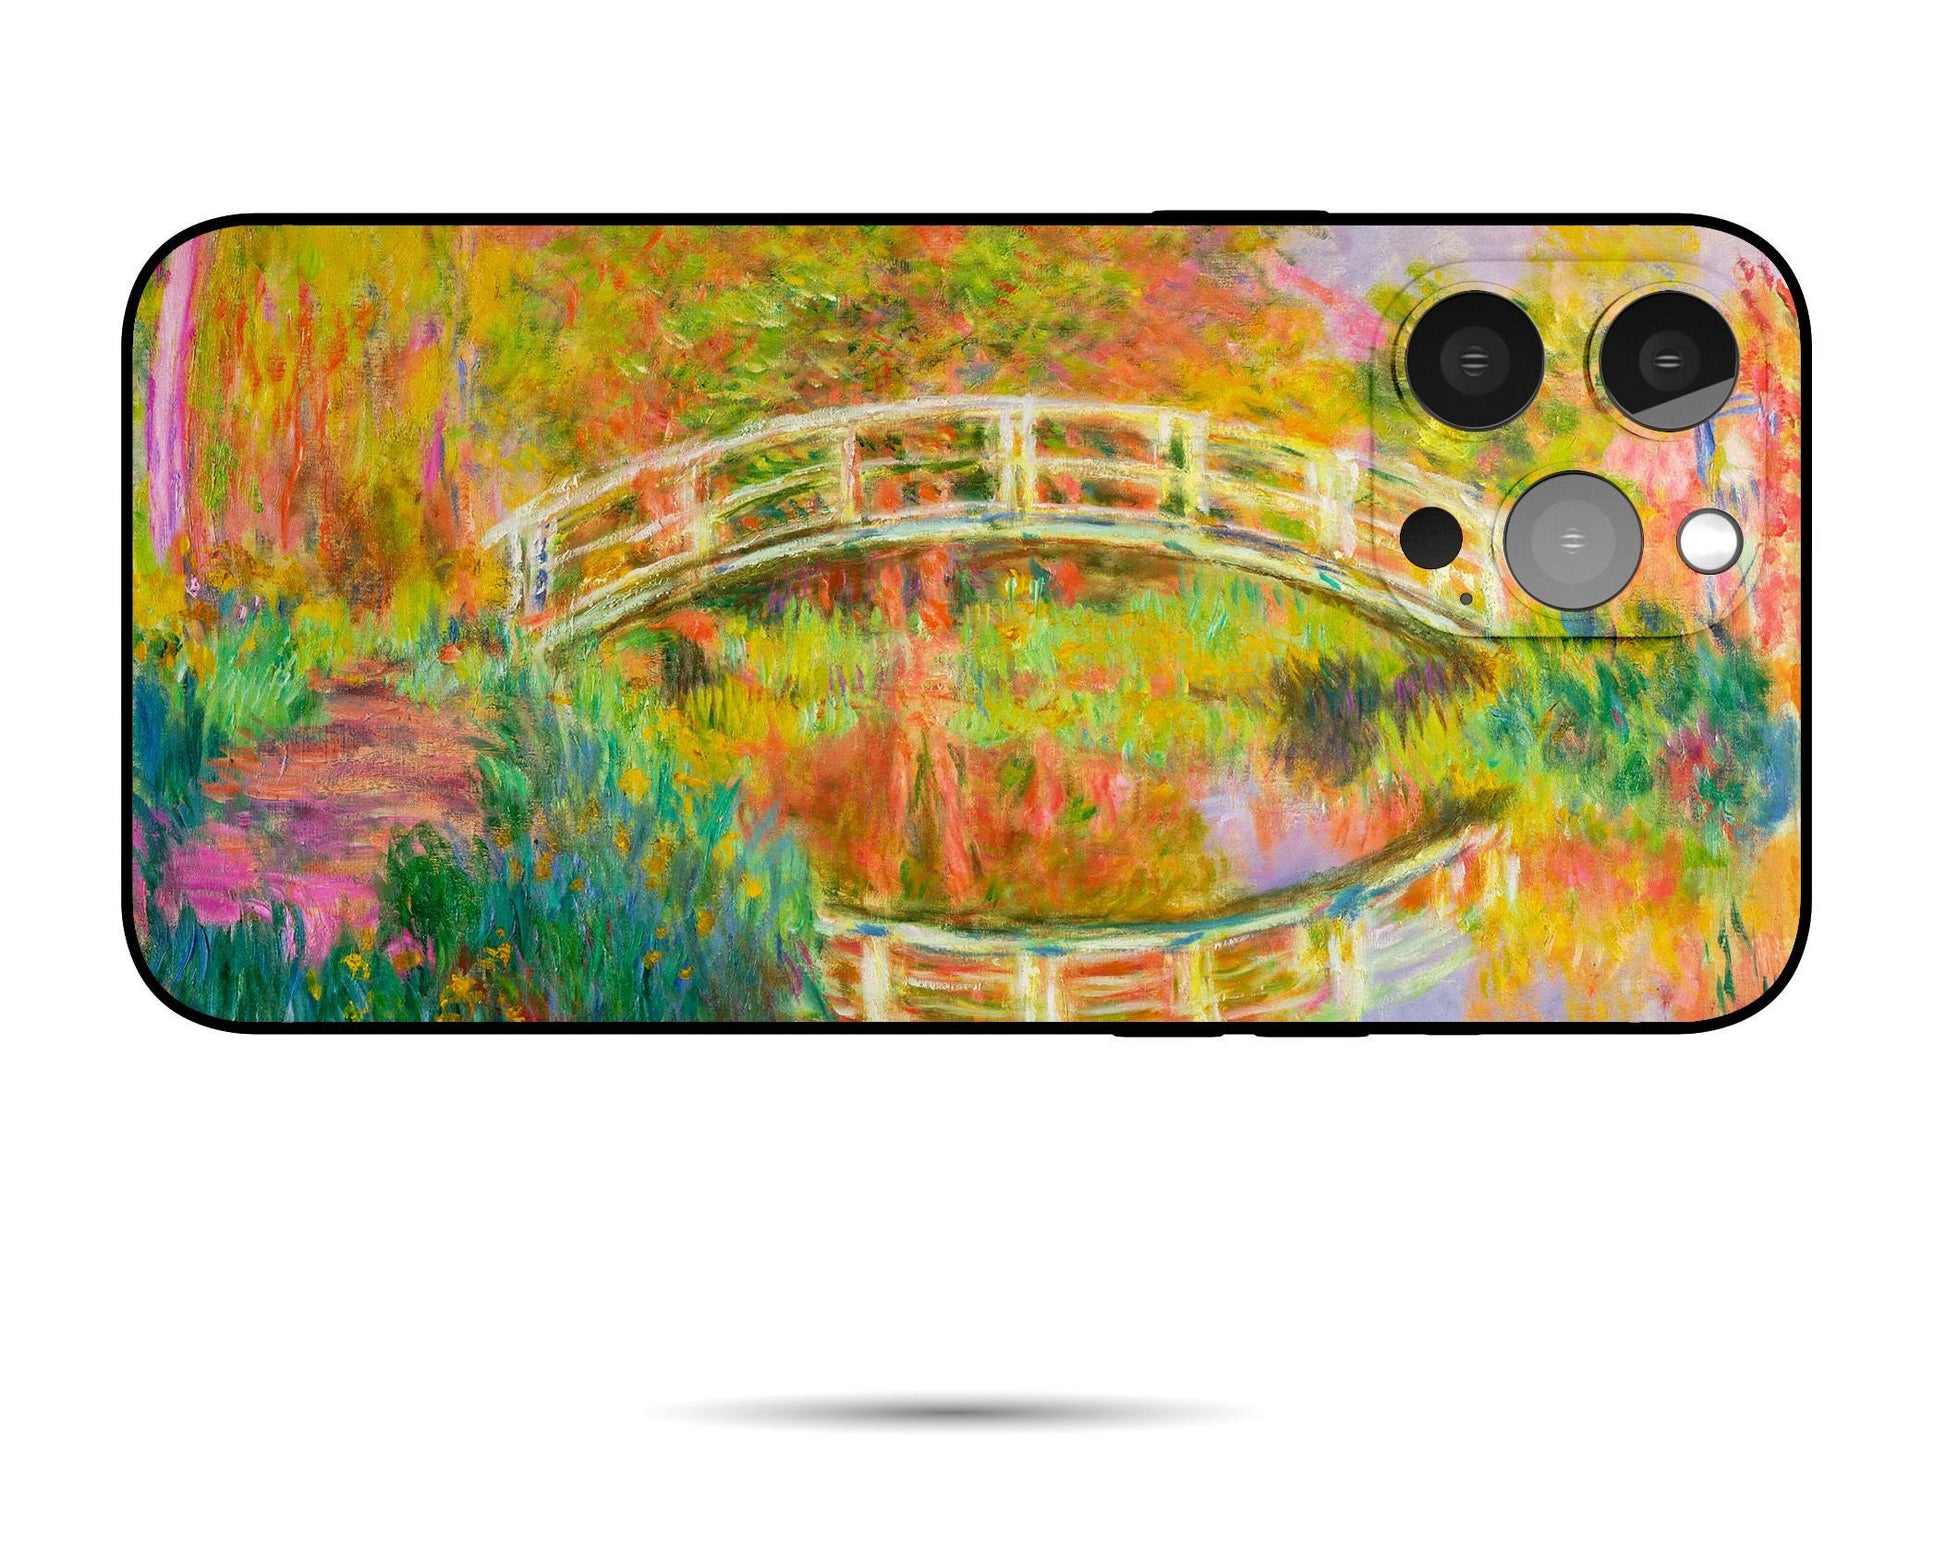 Claude Monet Paintings Iphone 14 Pro Max Case, Iphone 11 Case, Iphone Xs, Iphone 8 Plus Case Art, Aesthetic Iphone, Iphone Protective Case